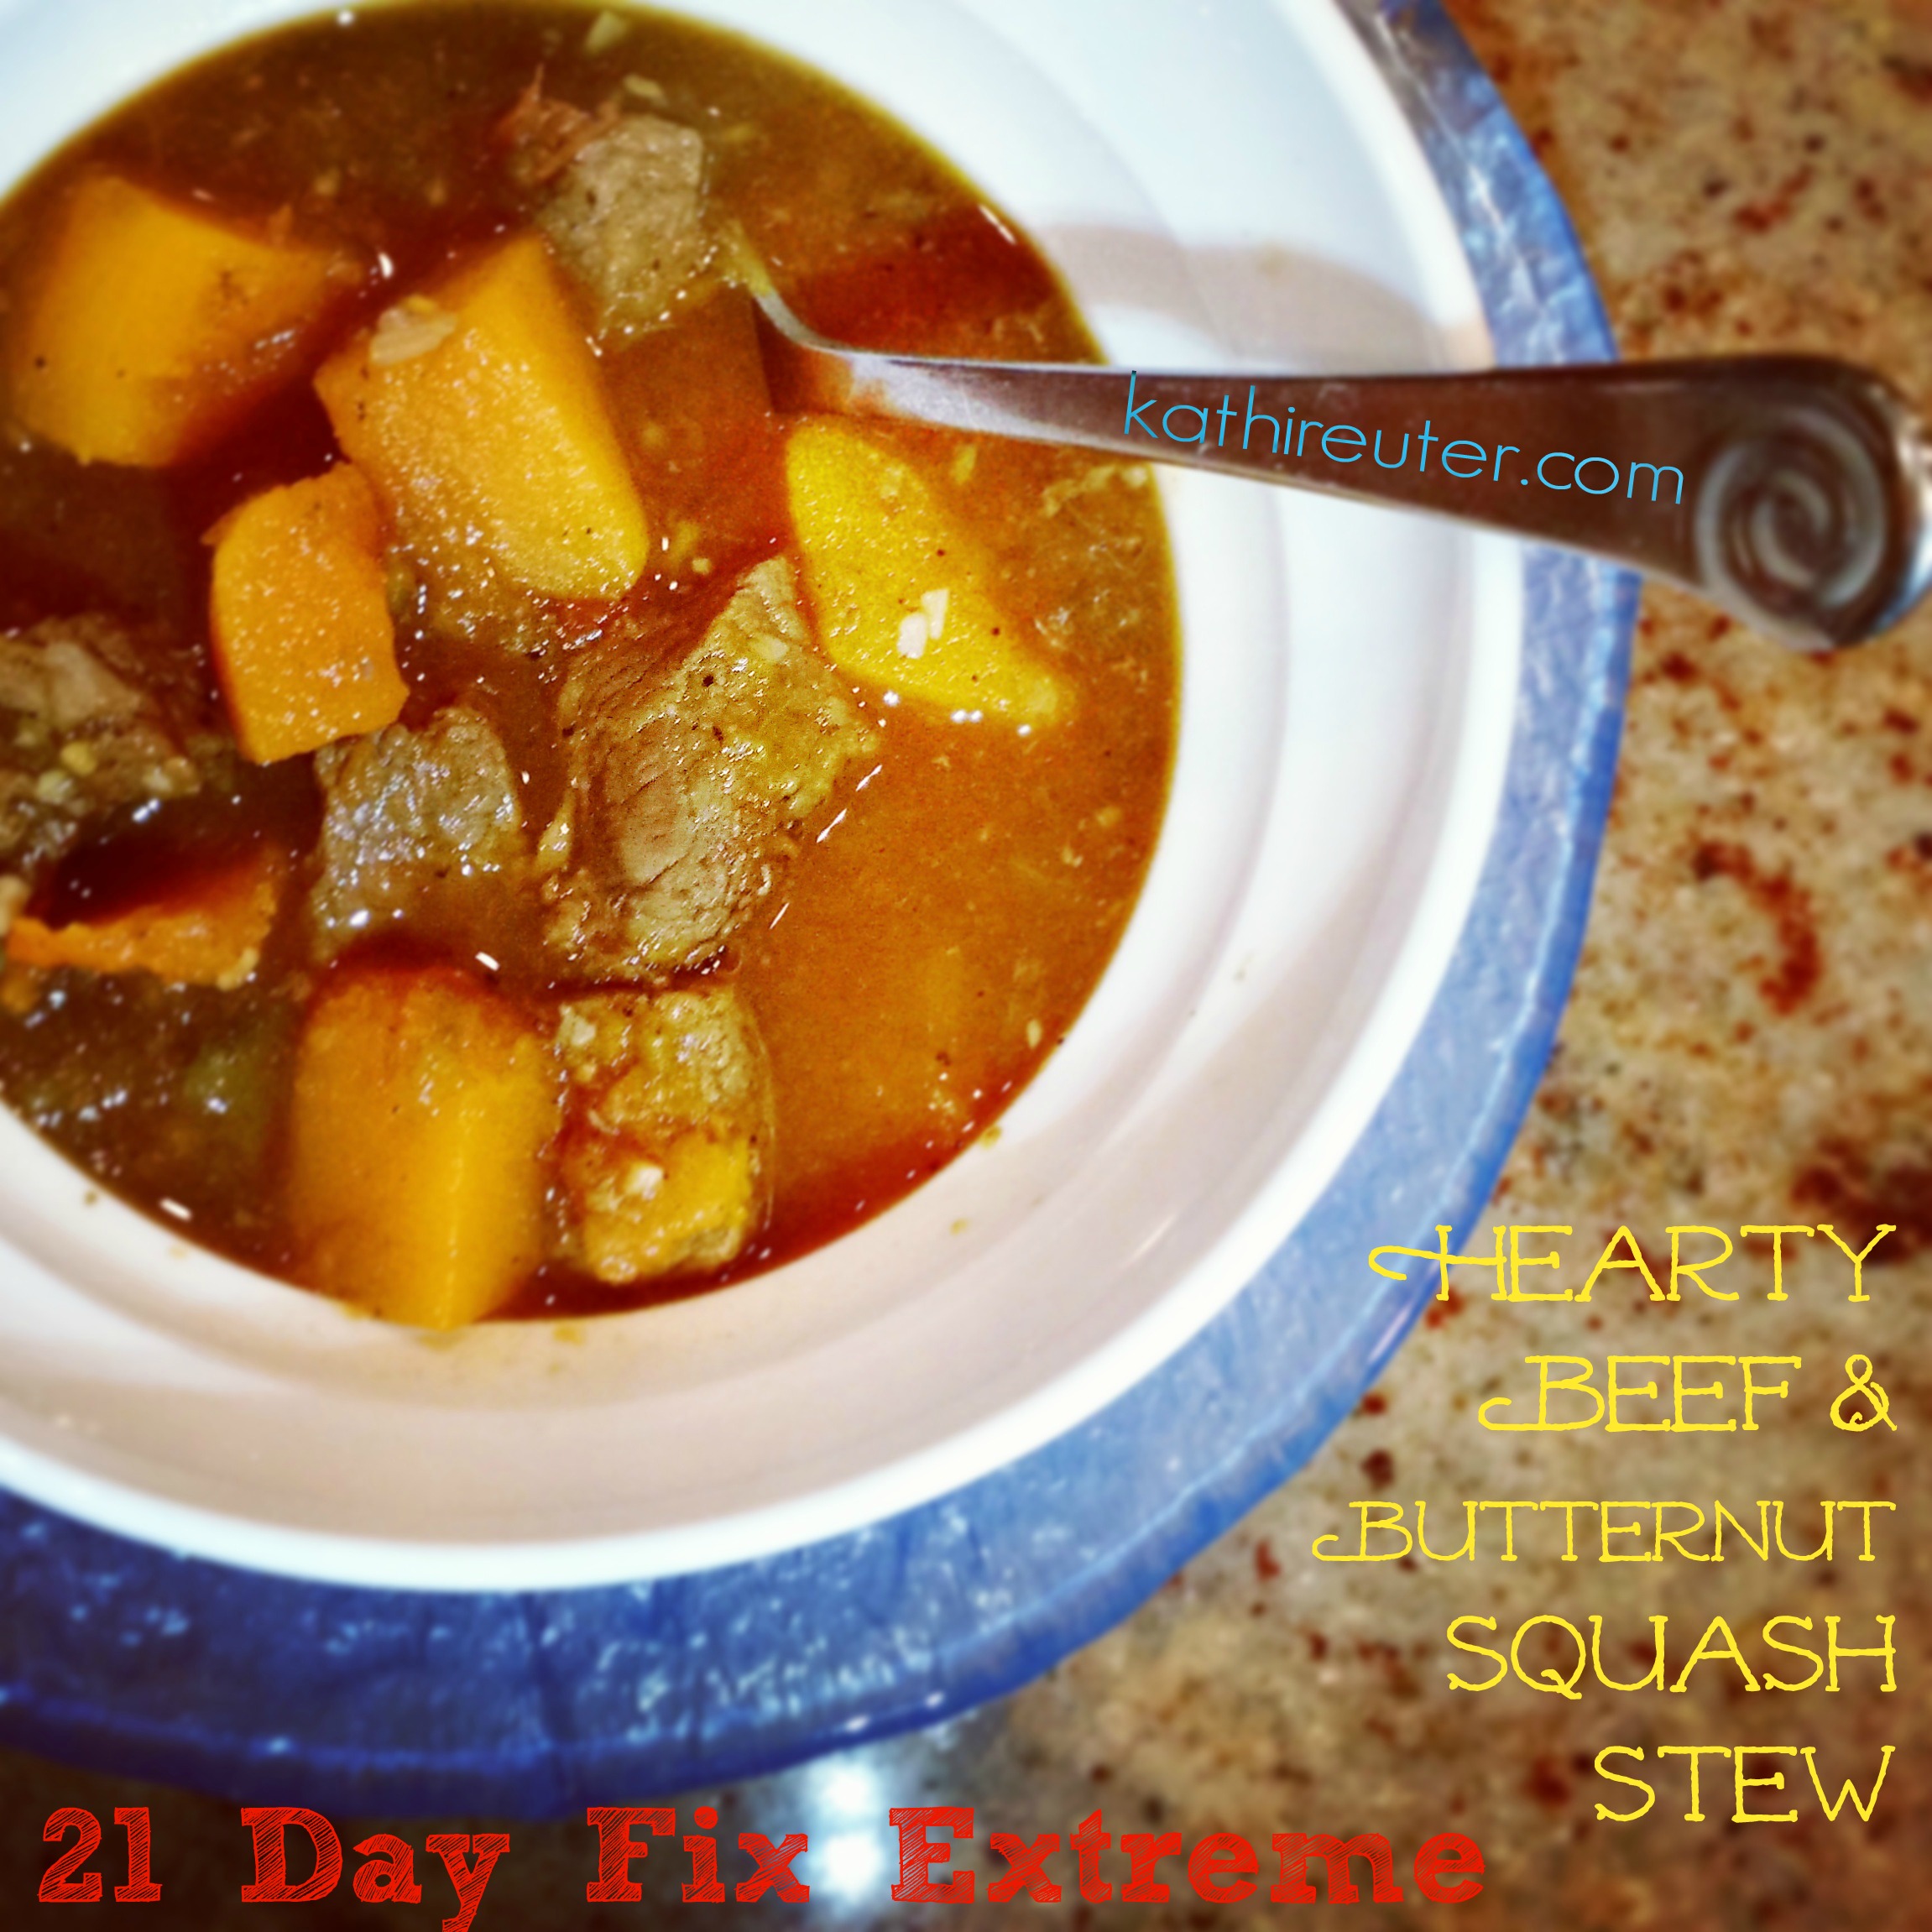 21 Day FIx Beef and Butternut Squash Stew